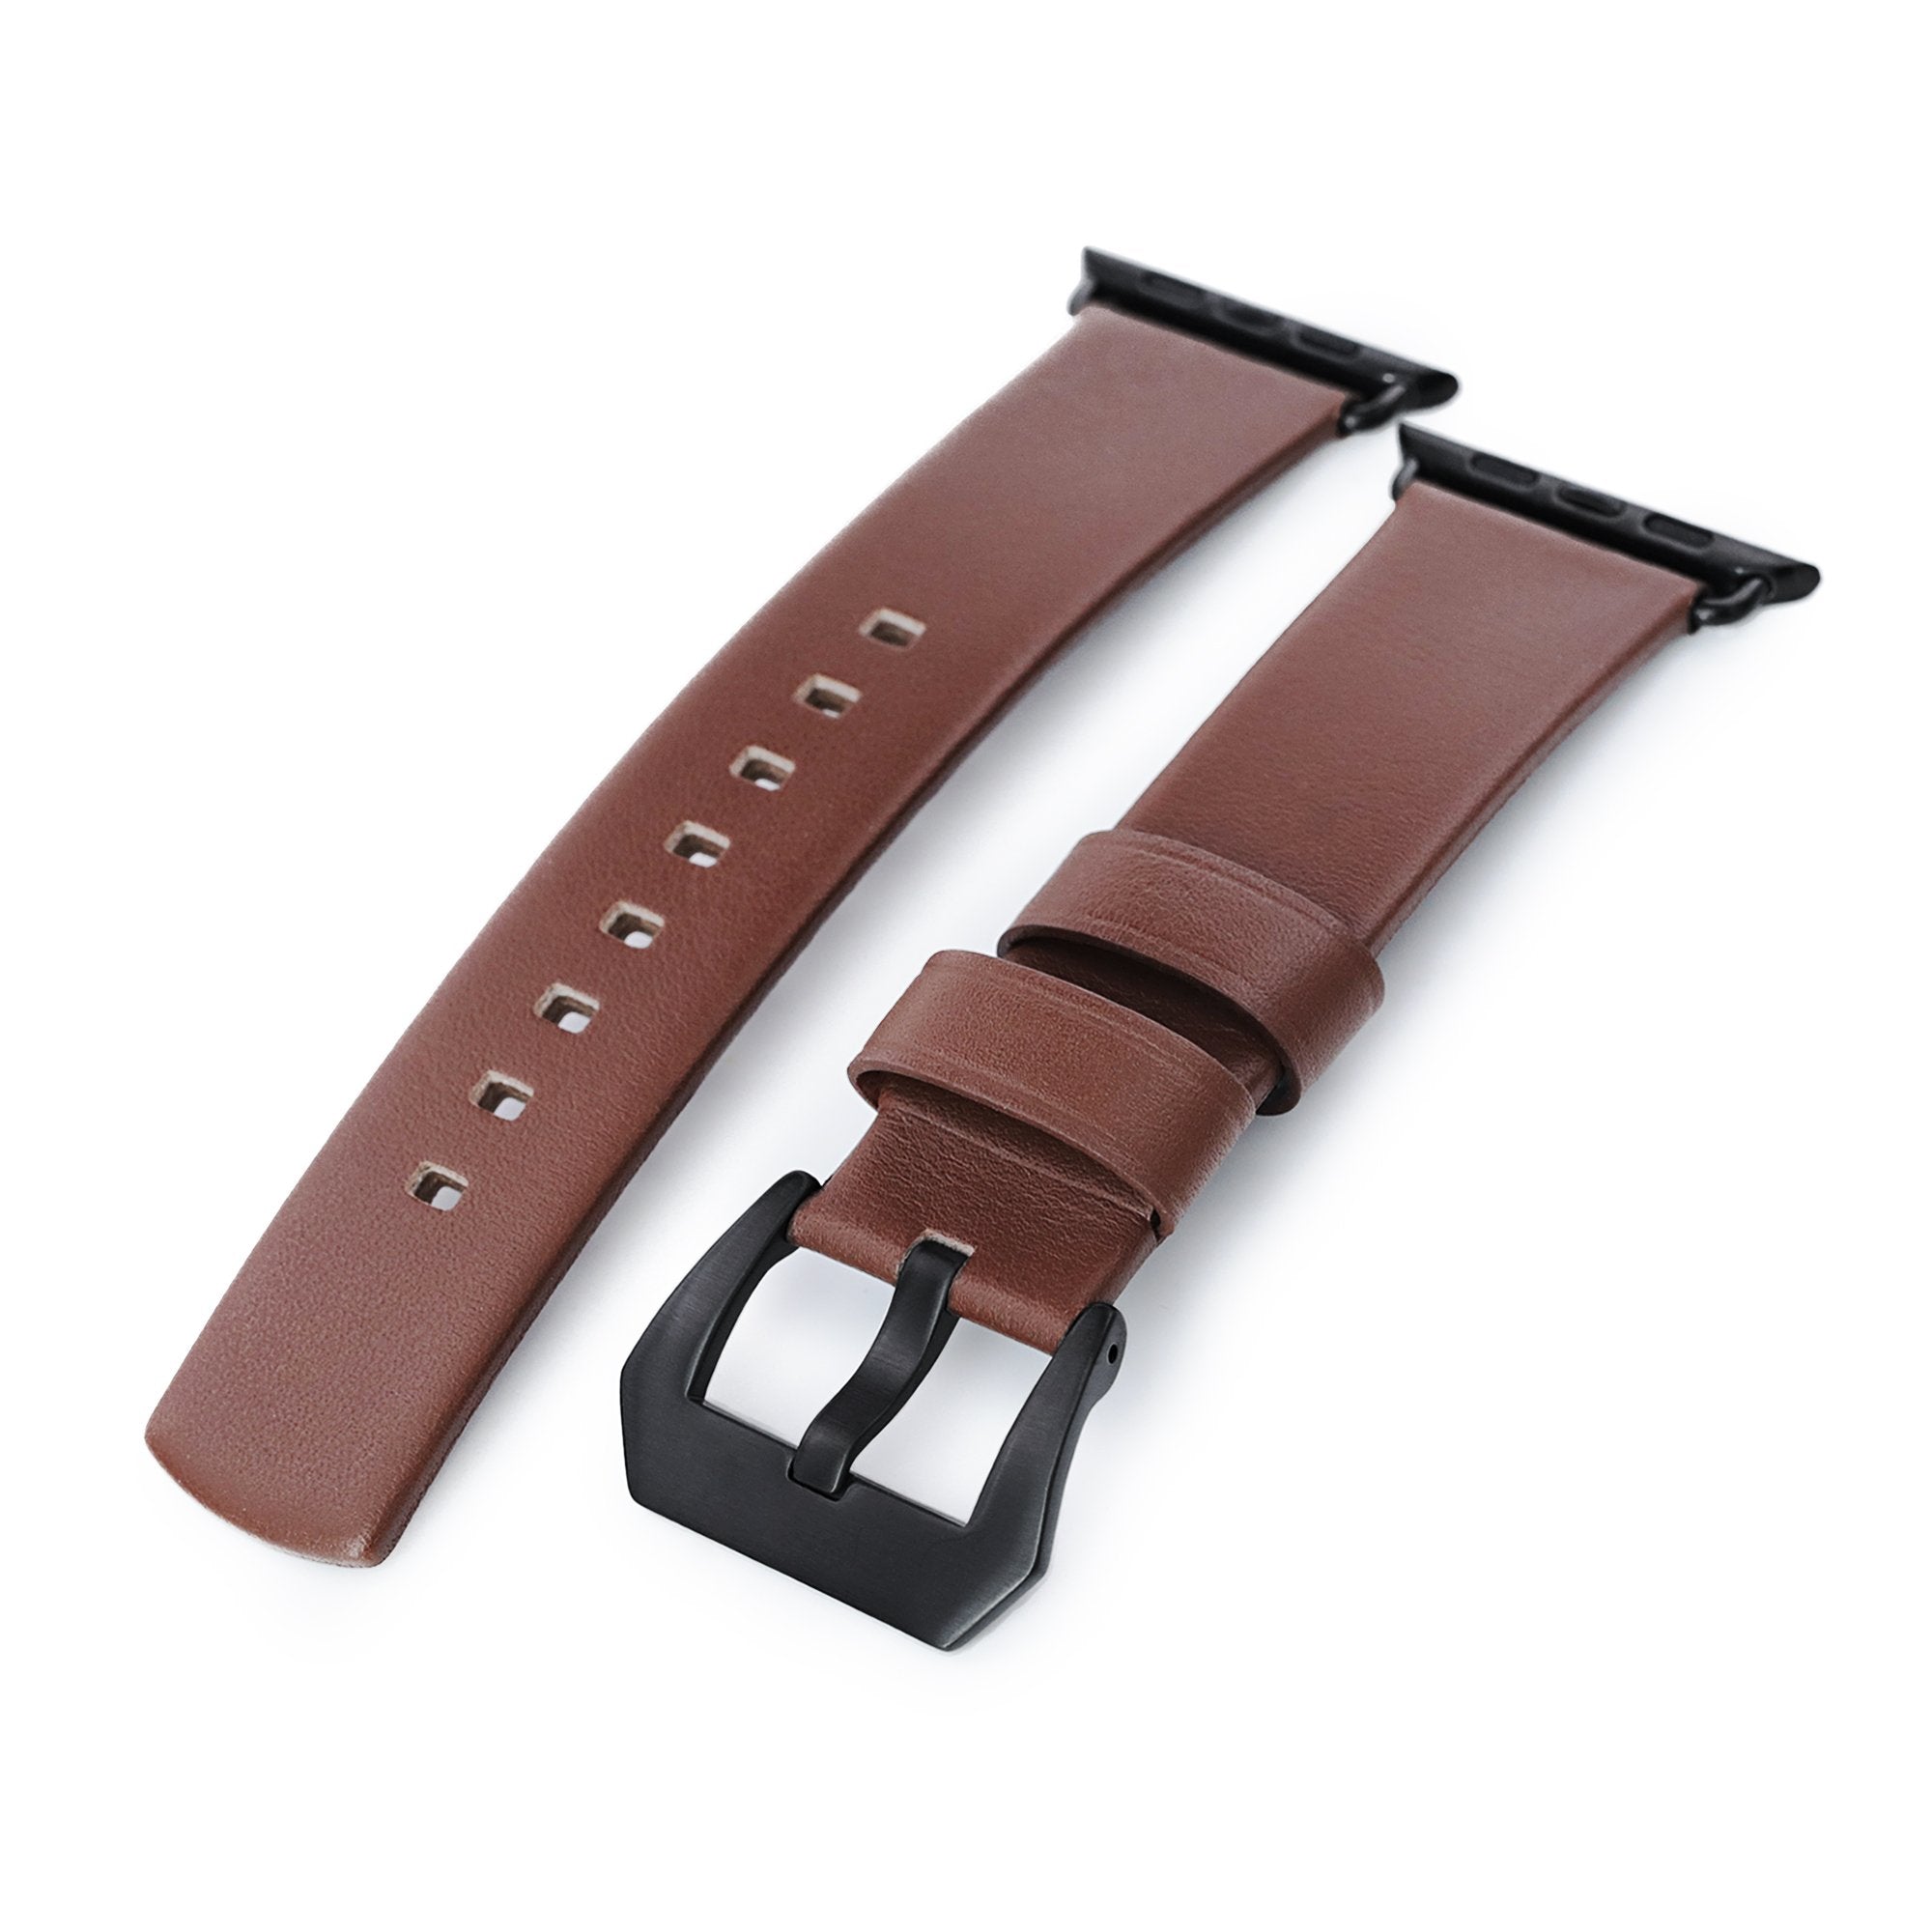 Water Repellent Brown Leather Apple Watch Band for 44mm / 42mm models Strapcode Watch Bands